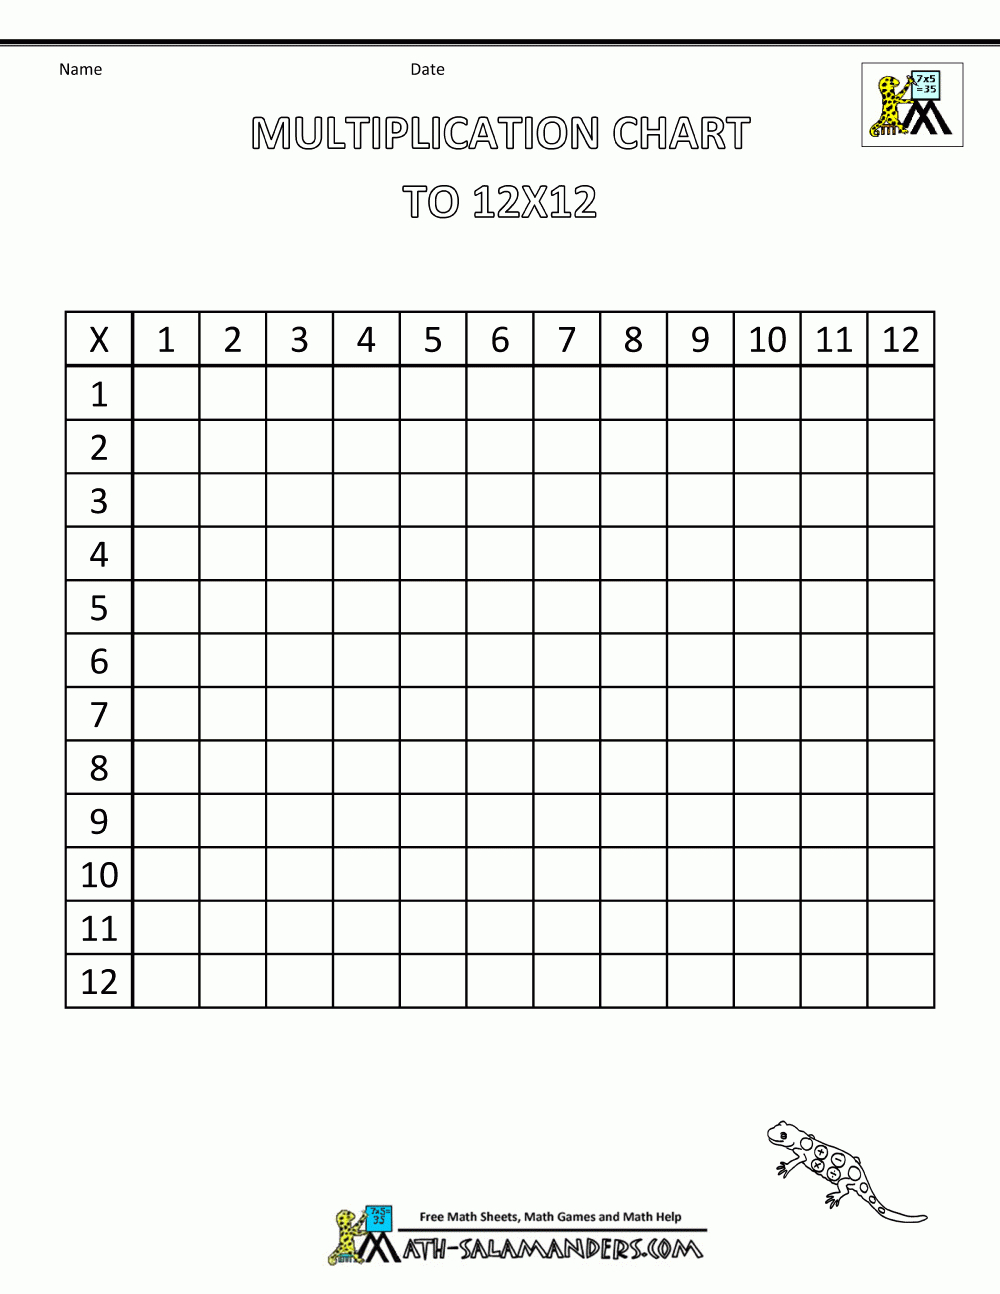 Multiplication Times Table Chart To 12X12 Blank | Educational - Free Printable Blank Multiplication Table 1 12